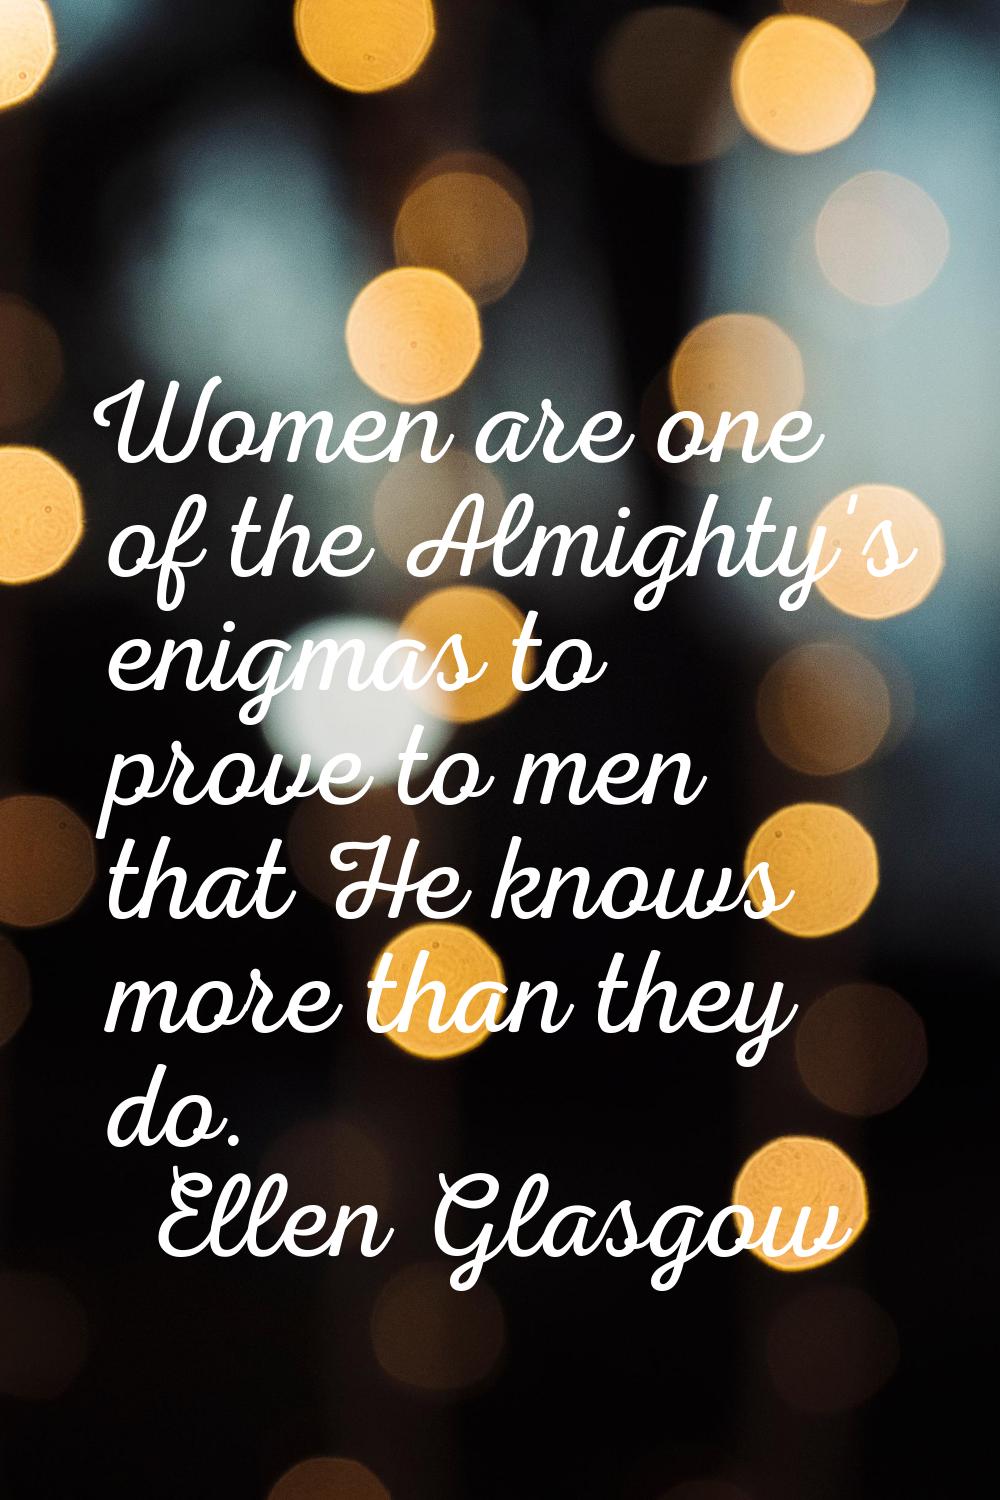 Women are one of the Almighty's enigmas to prove to men that He knows more than they do.